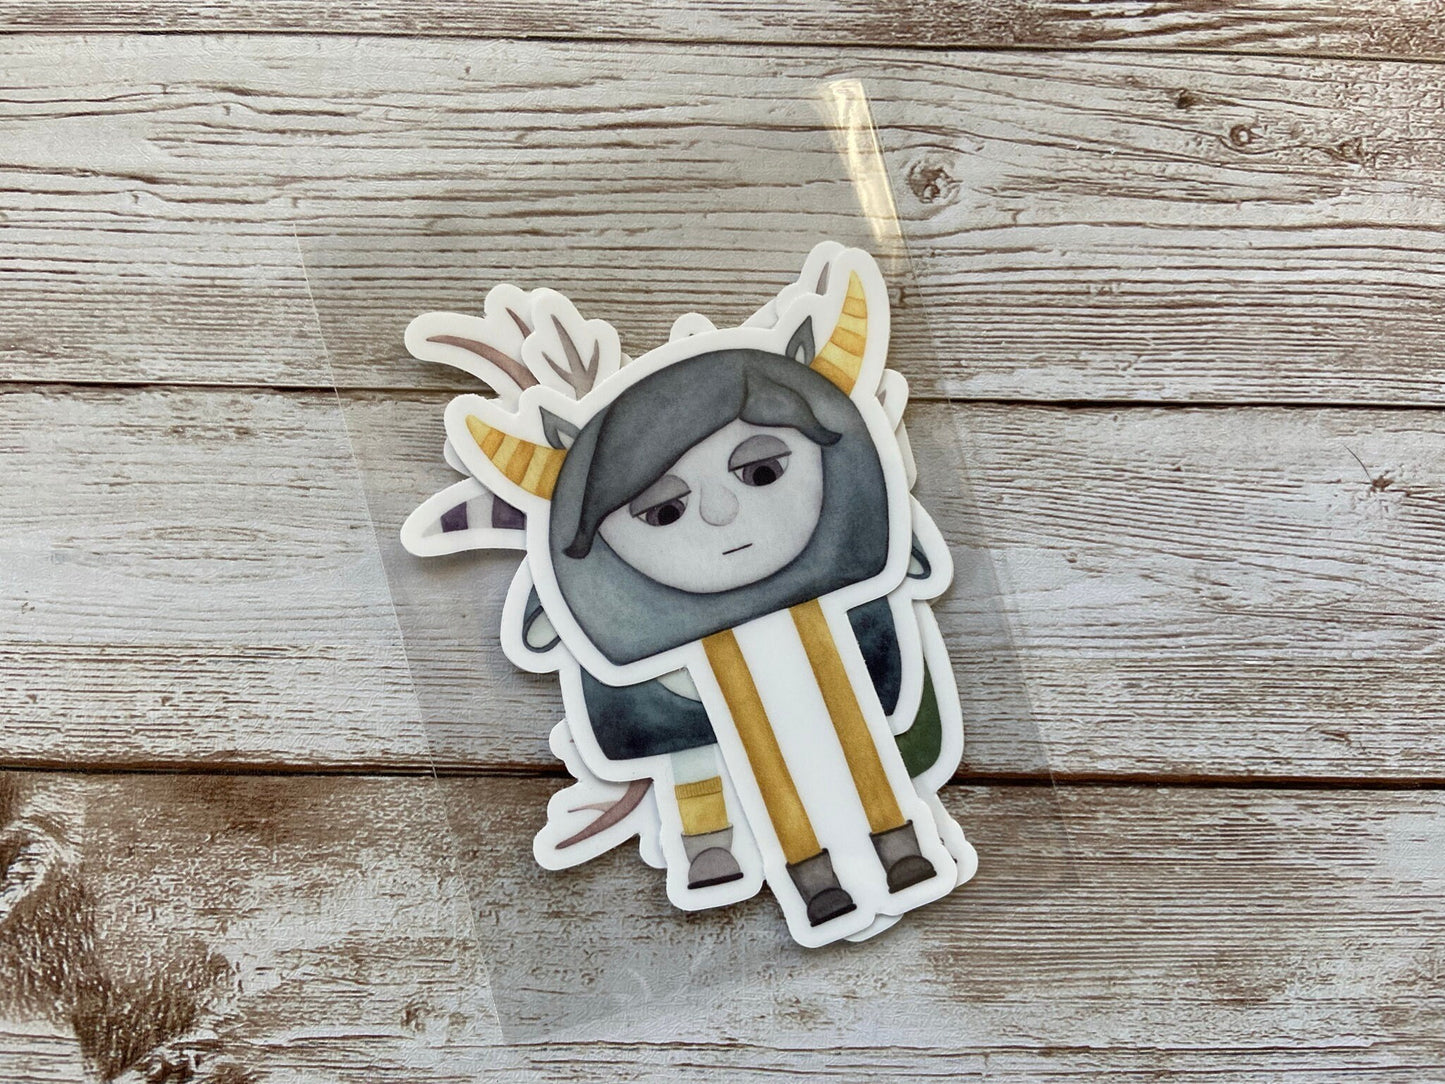 Whimsical Characters Sticker Pack | Die Cut Sticker | Vinyl Sticker Pack